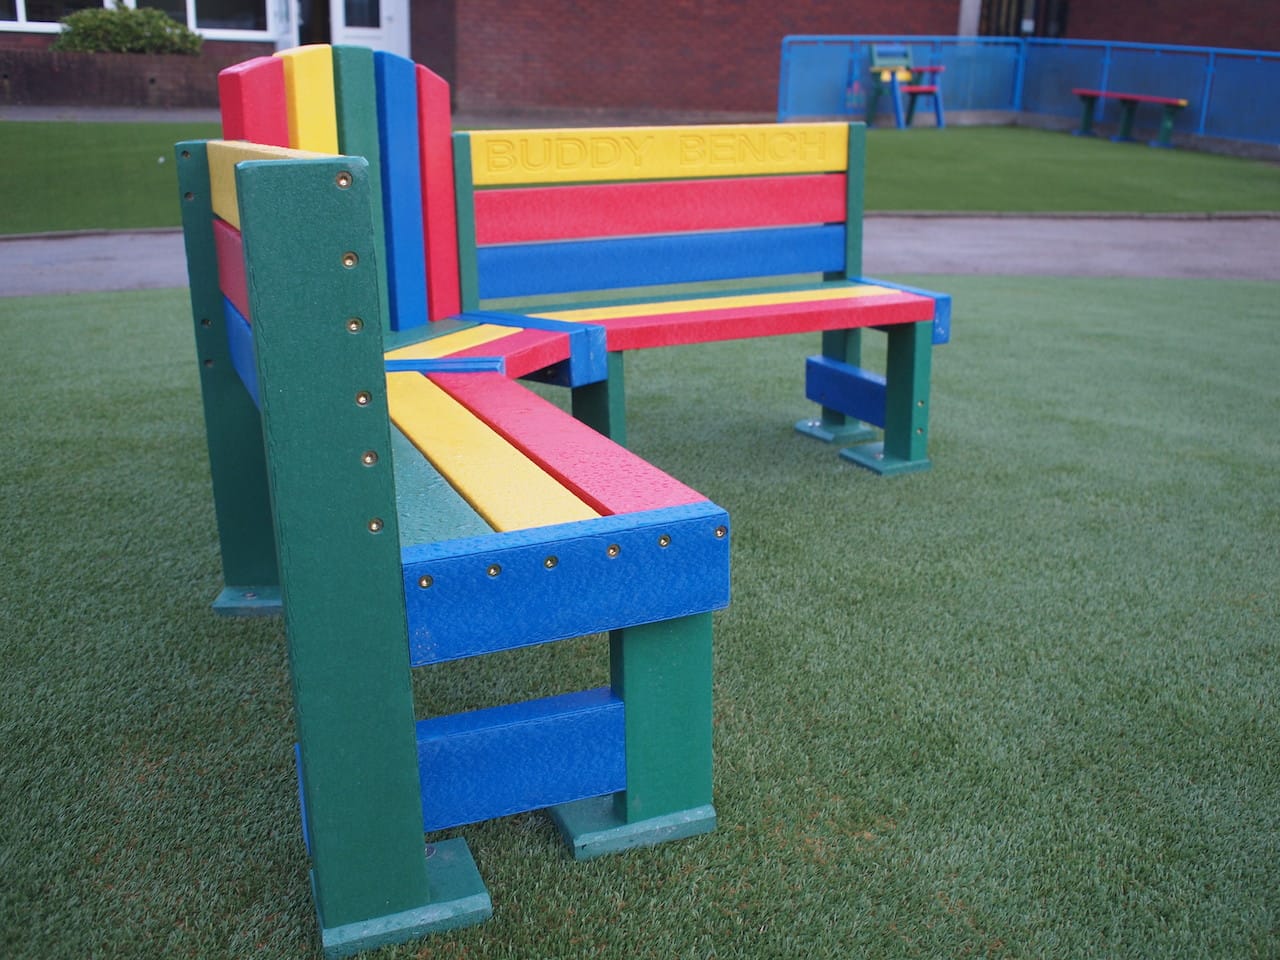 STM artificial grass and Marmax buddy bench playground equipment